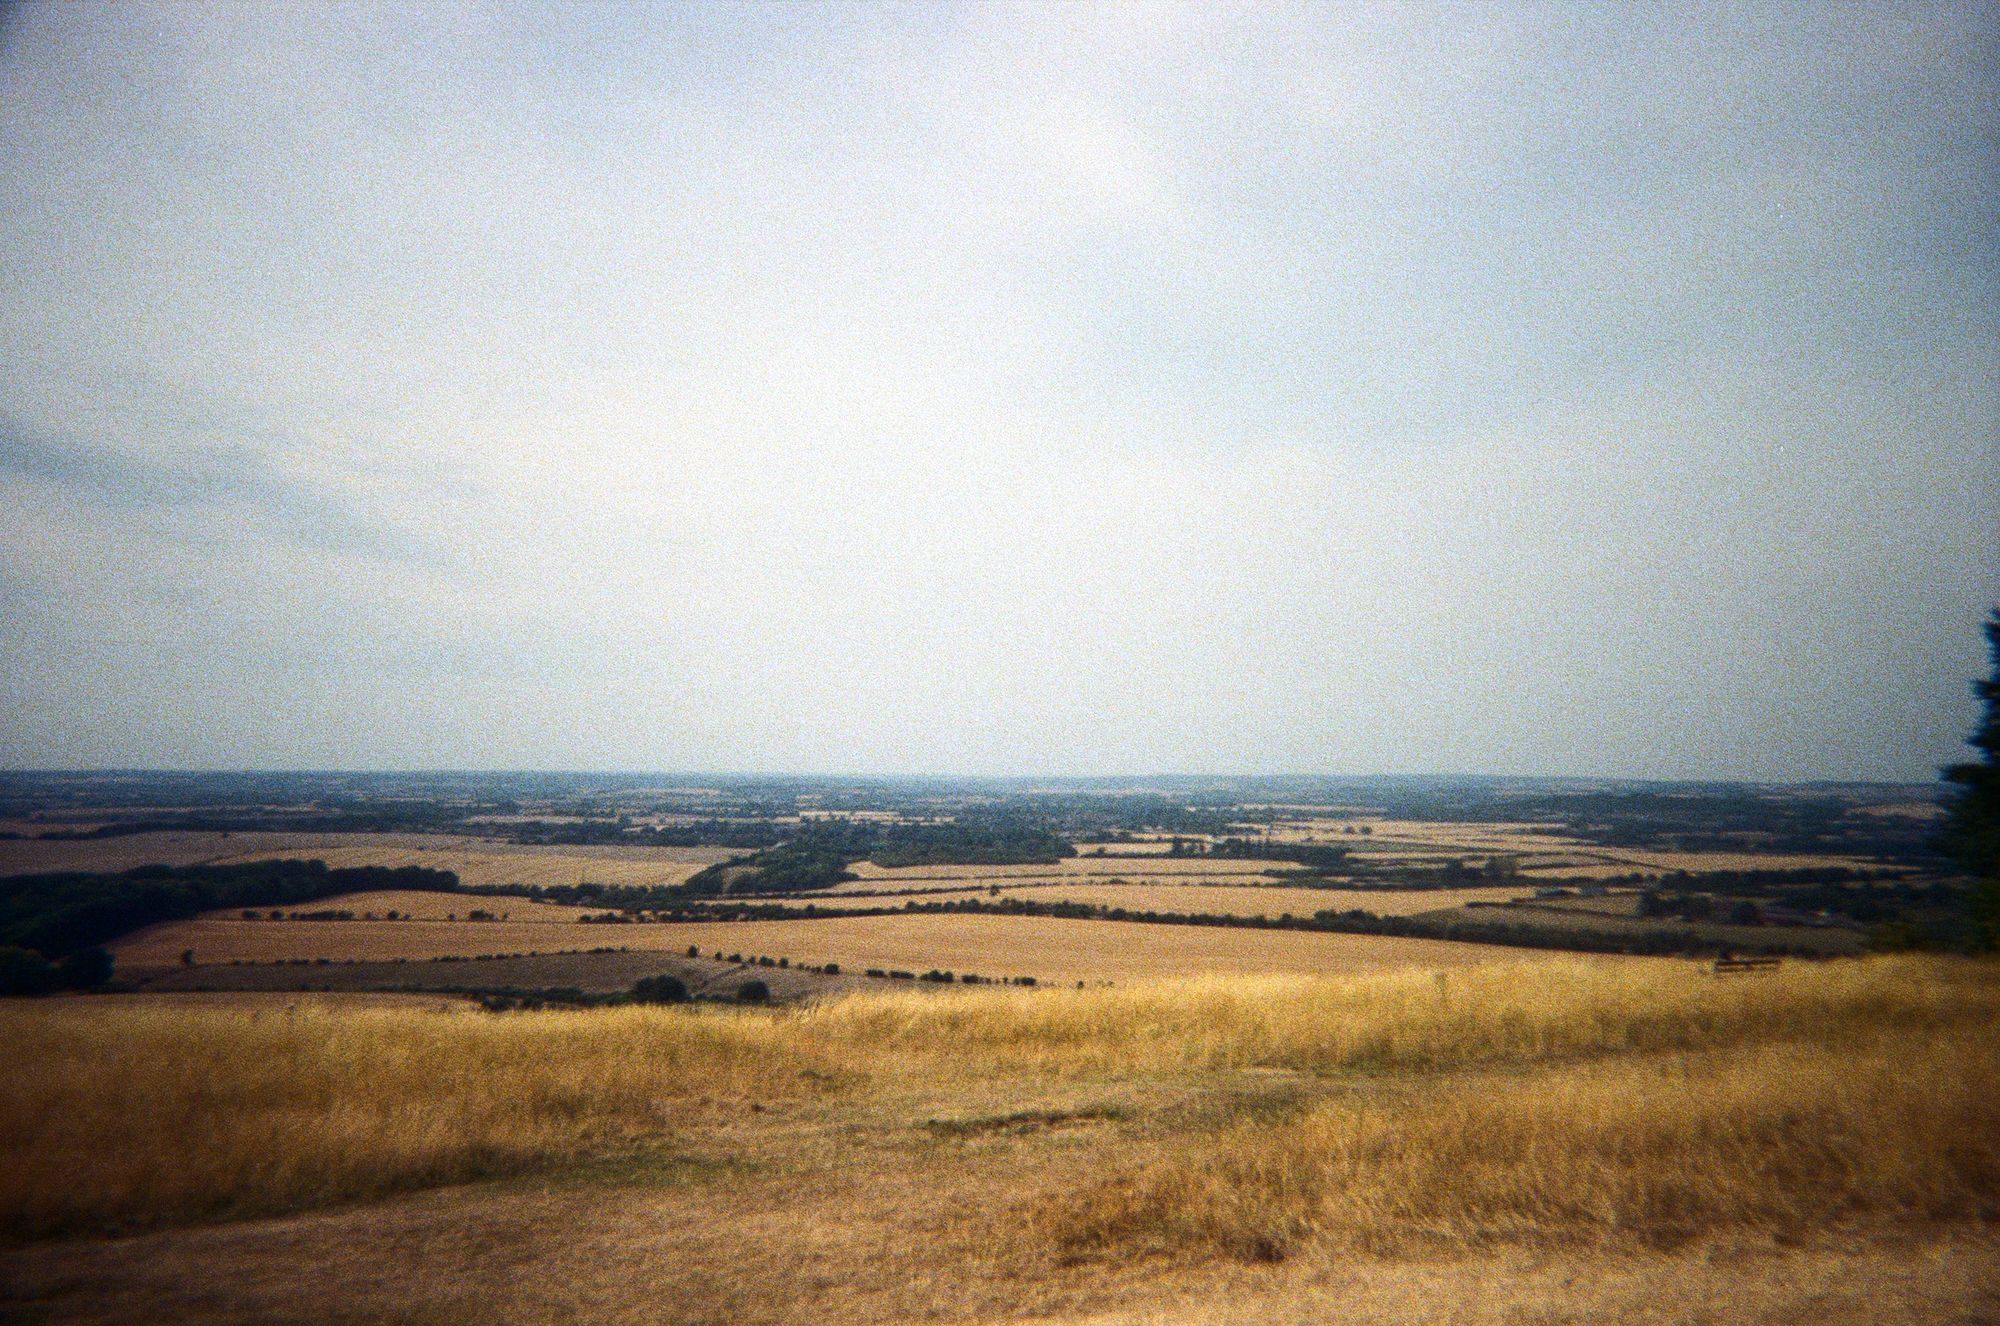 Looking over Dunstable Downs